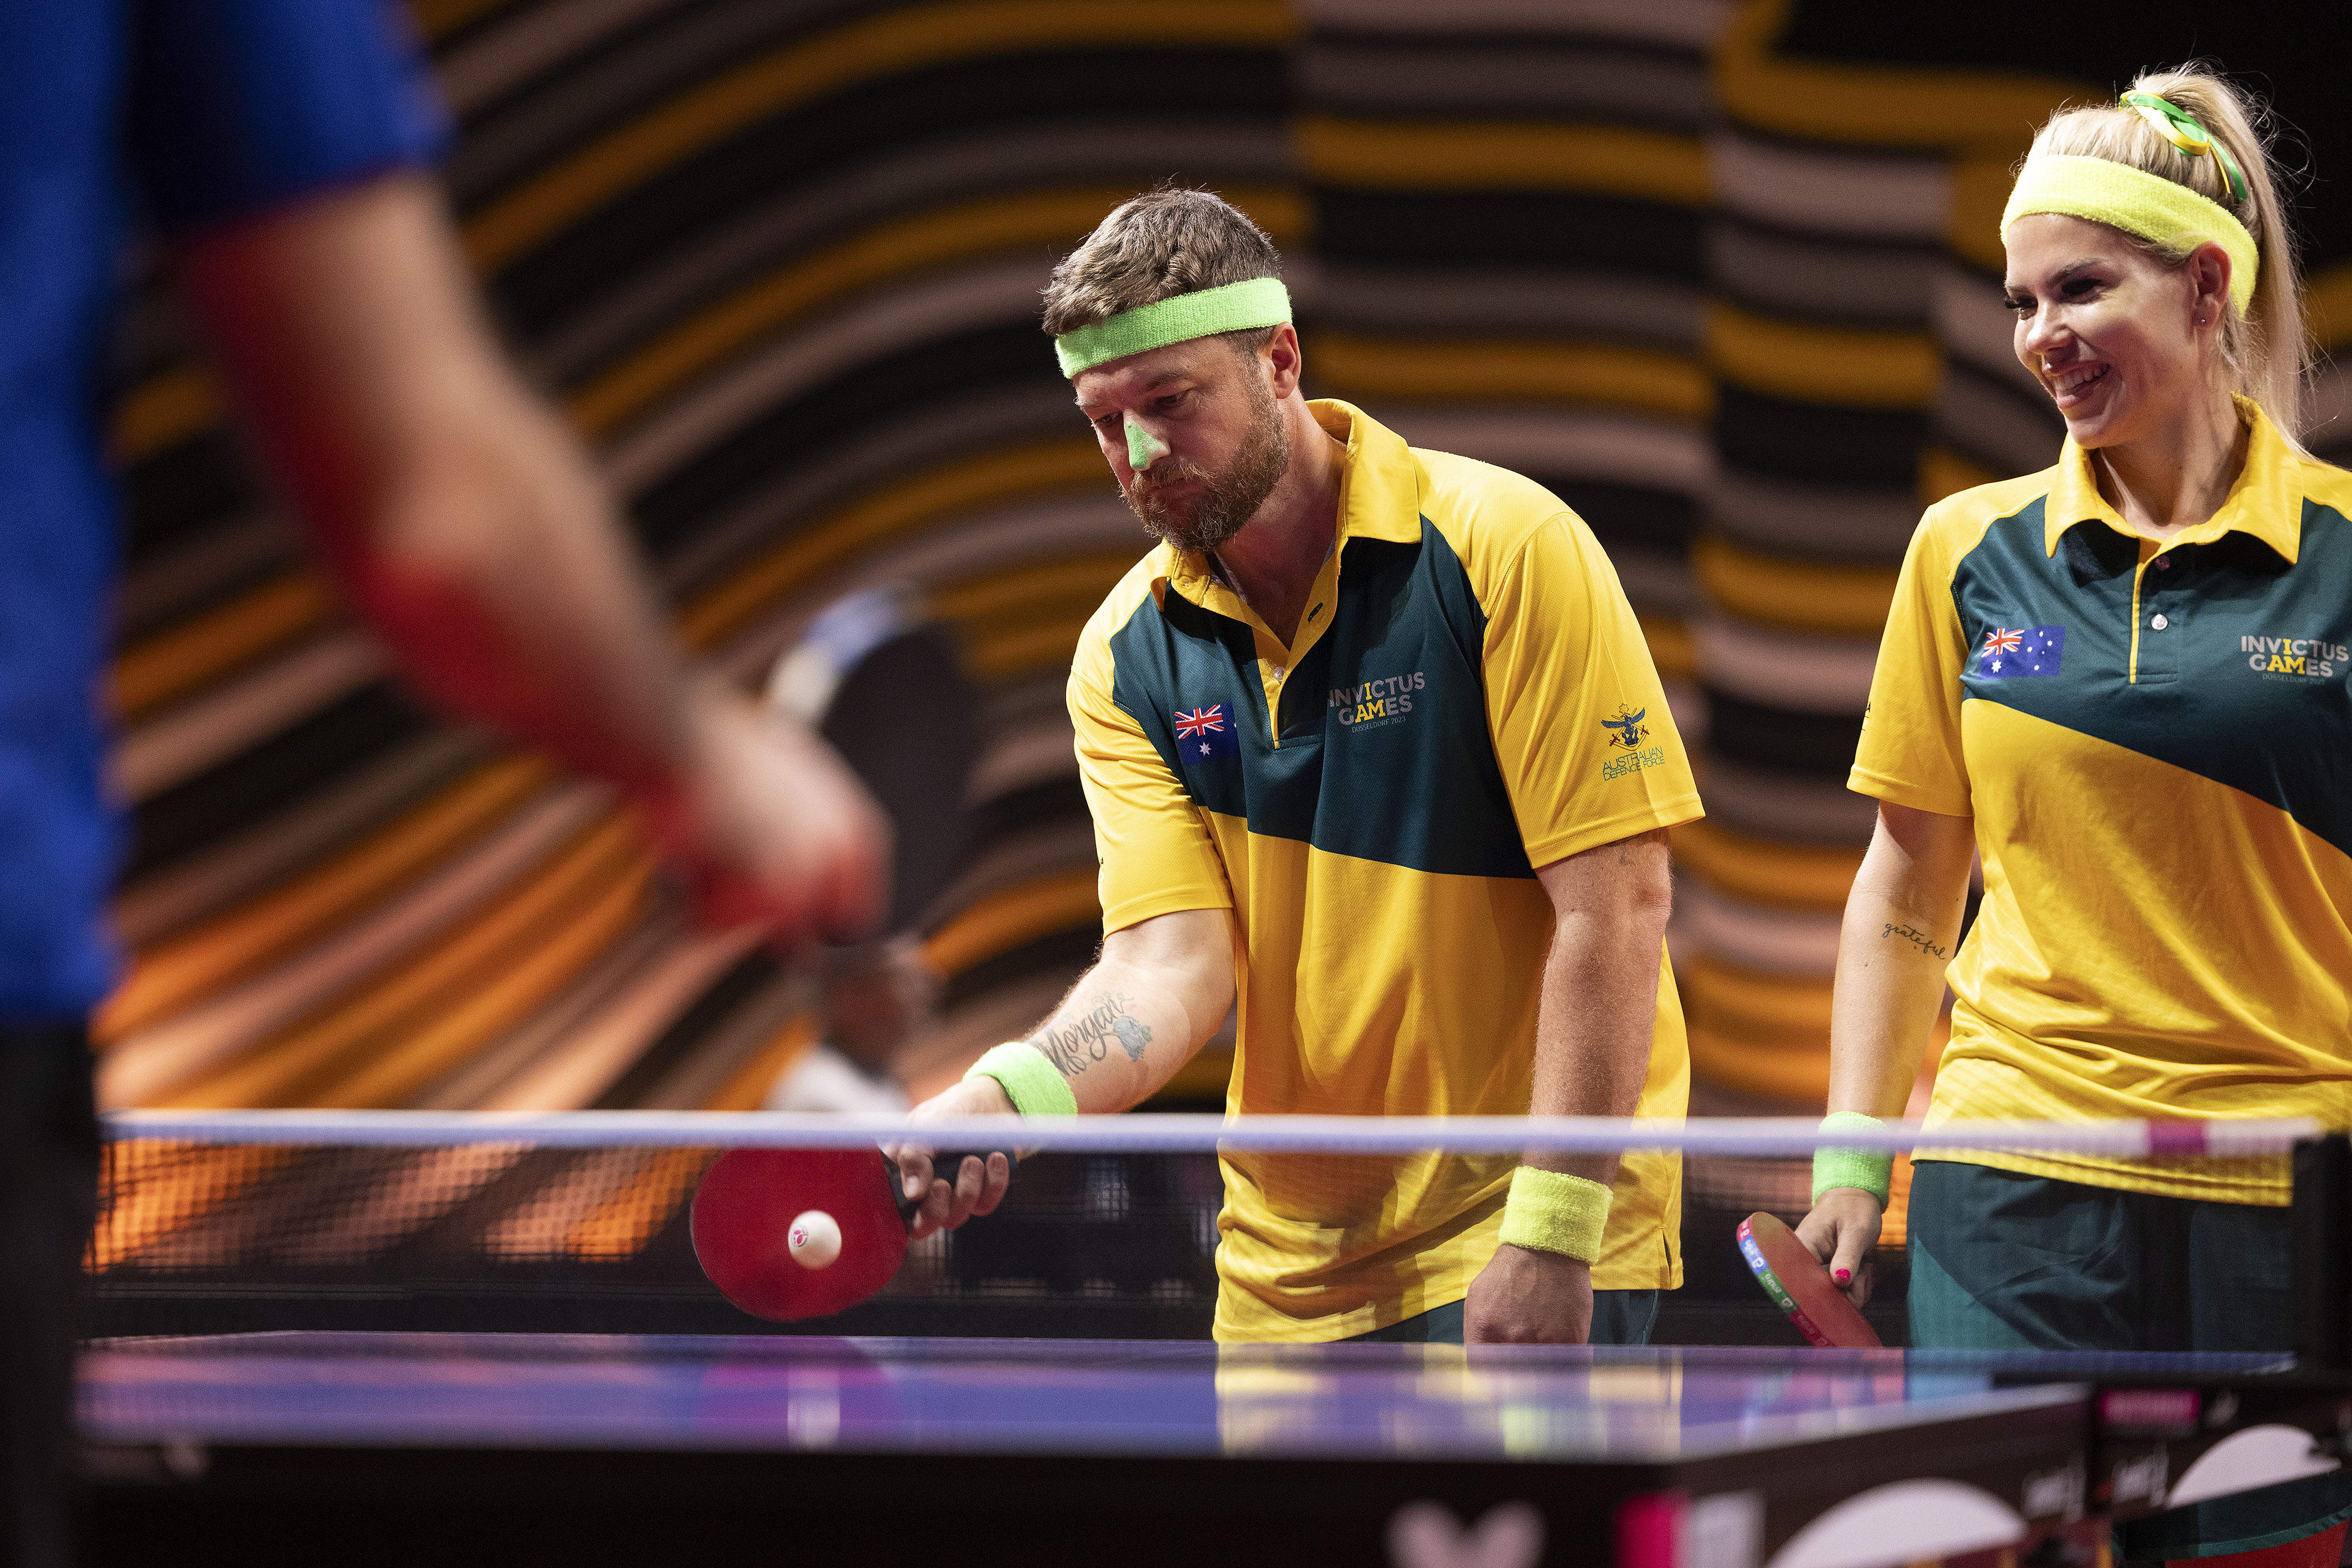 Steve Richards and Karney Armstrong represent Australia in the table tennis at Invictus Games Dusseldorf 2023.